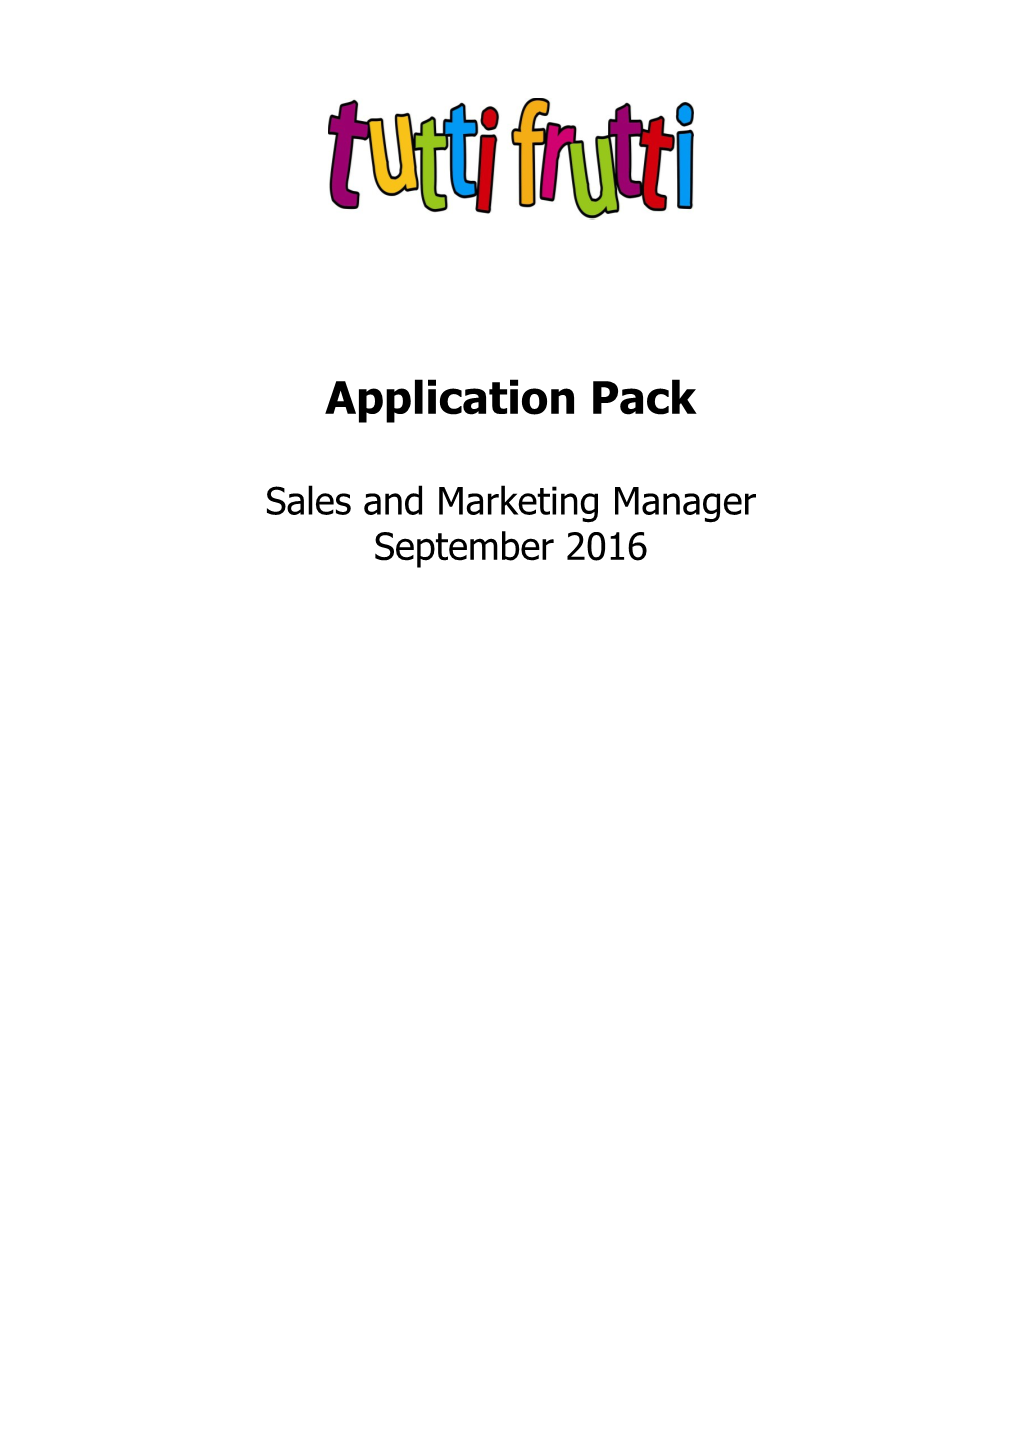 Application Pack s1